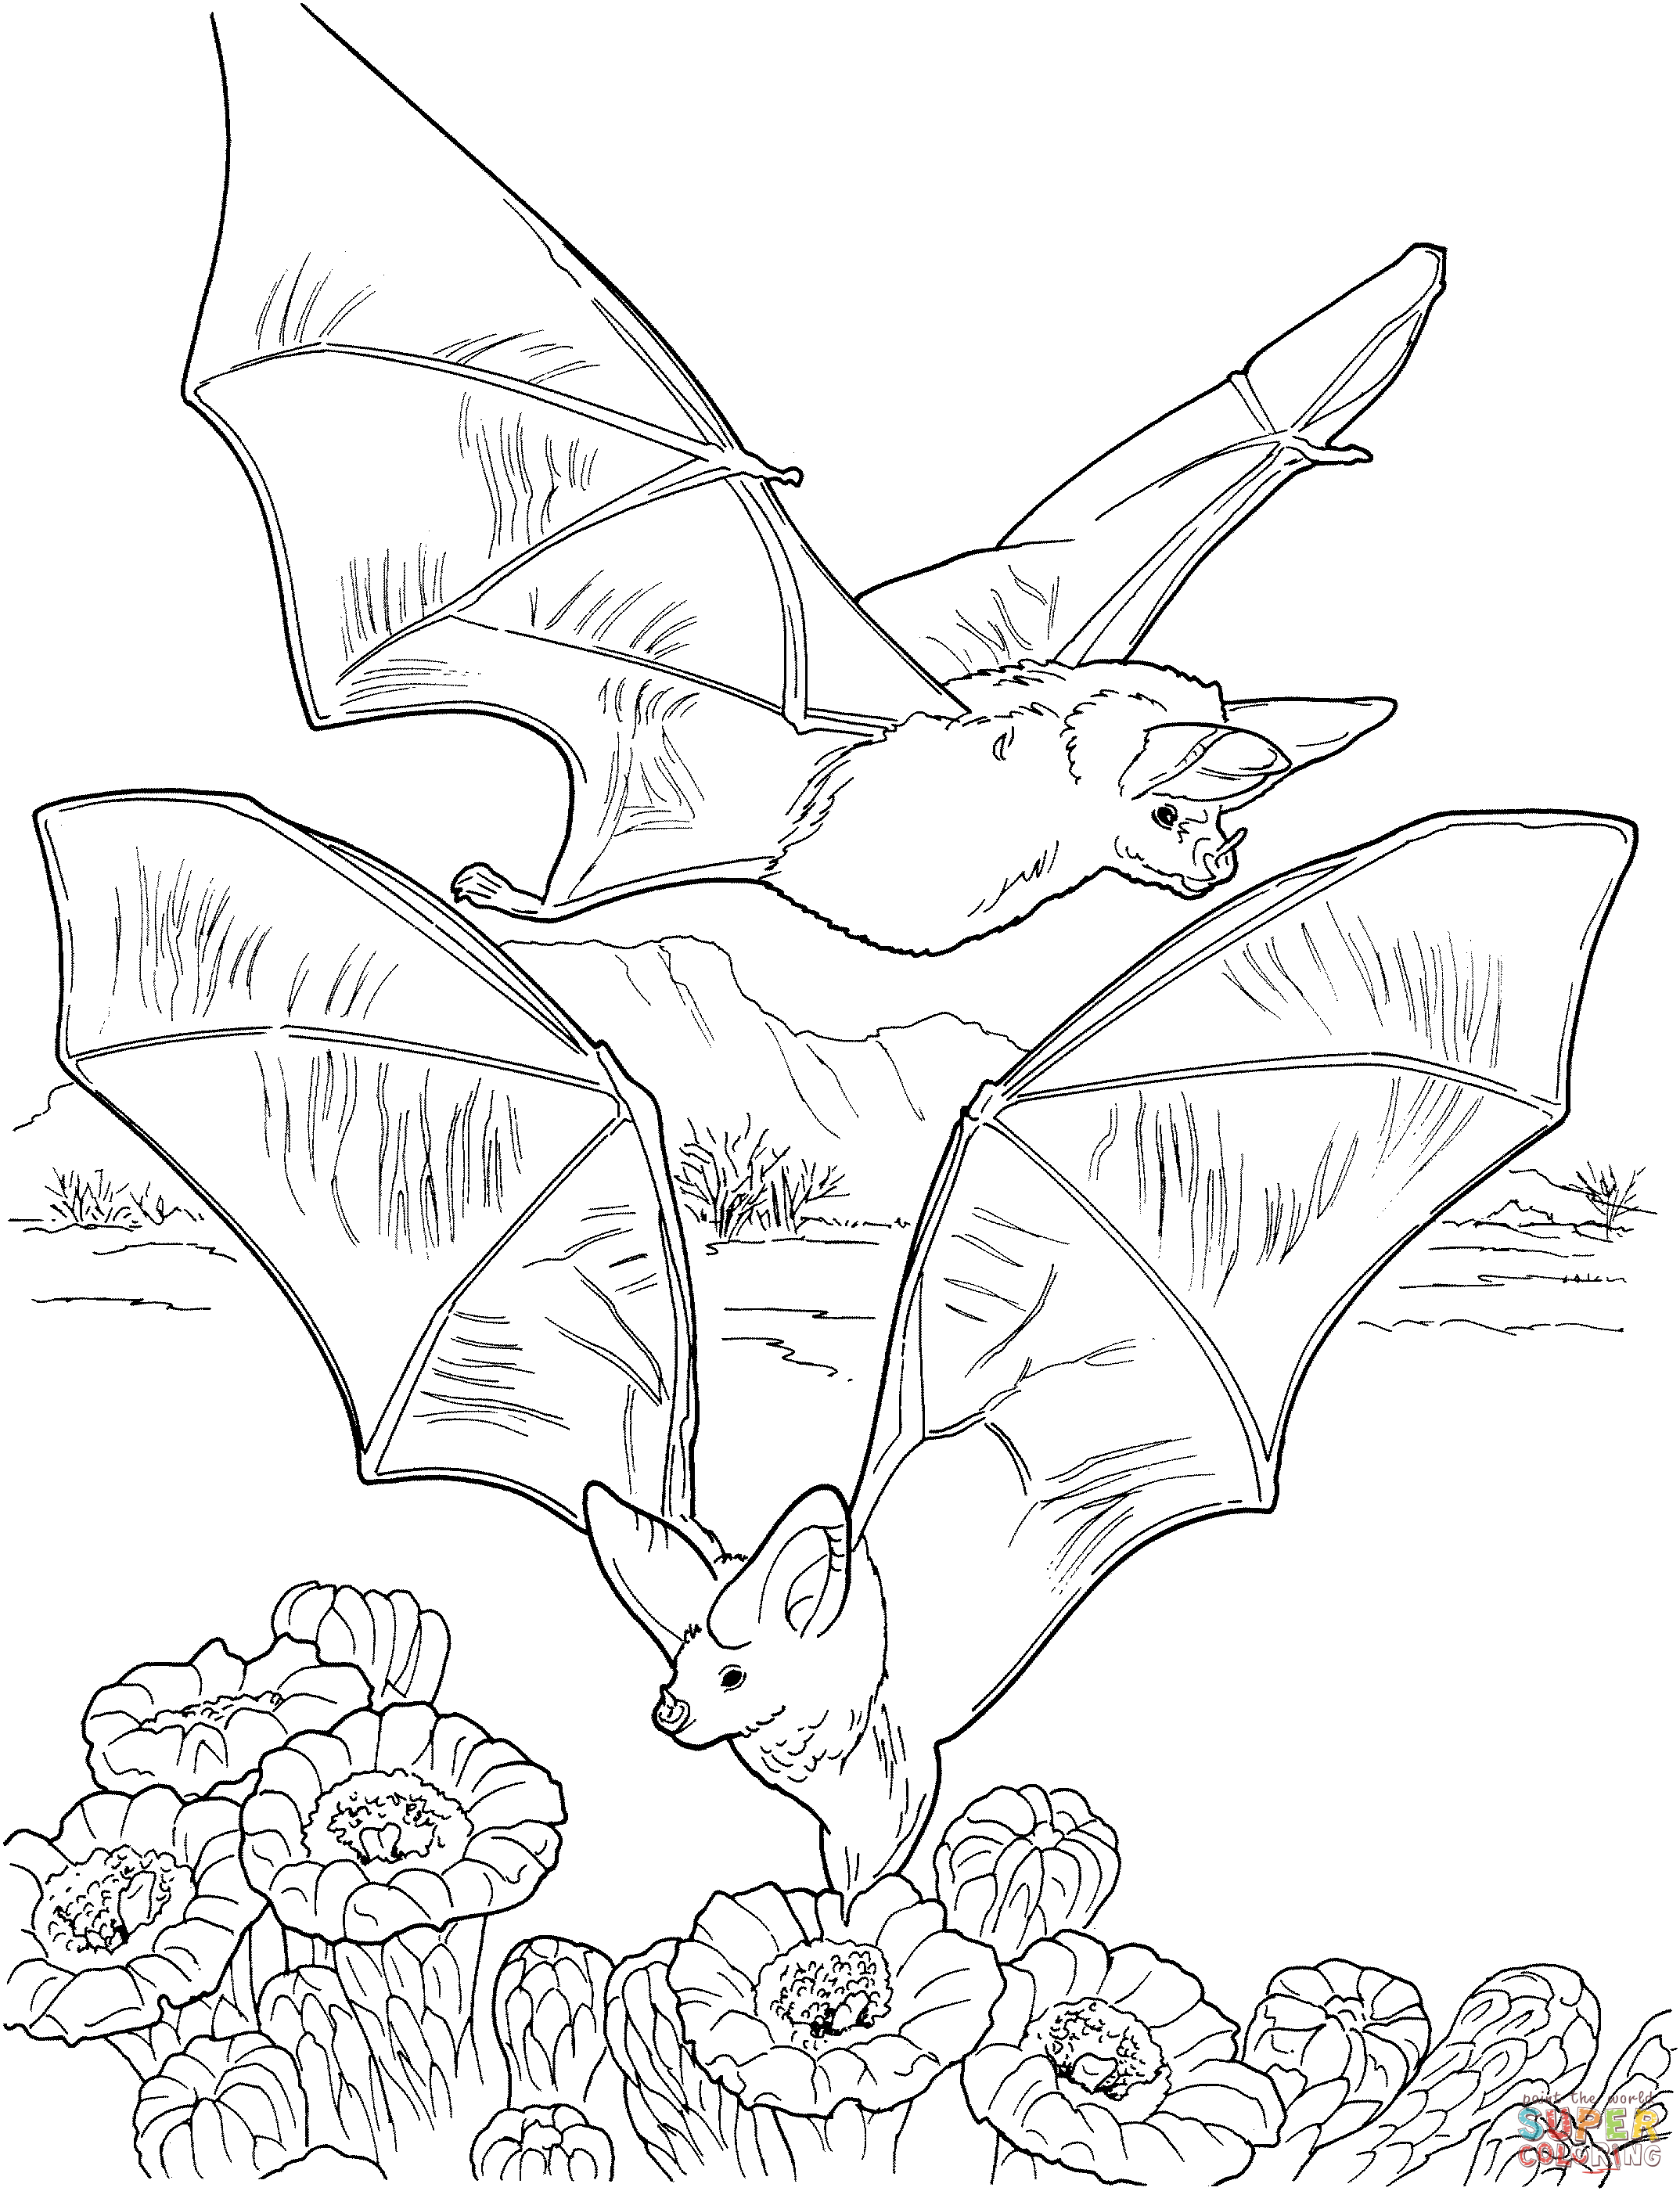 20 Cute Bat Coloring Pages You Can Print For Free